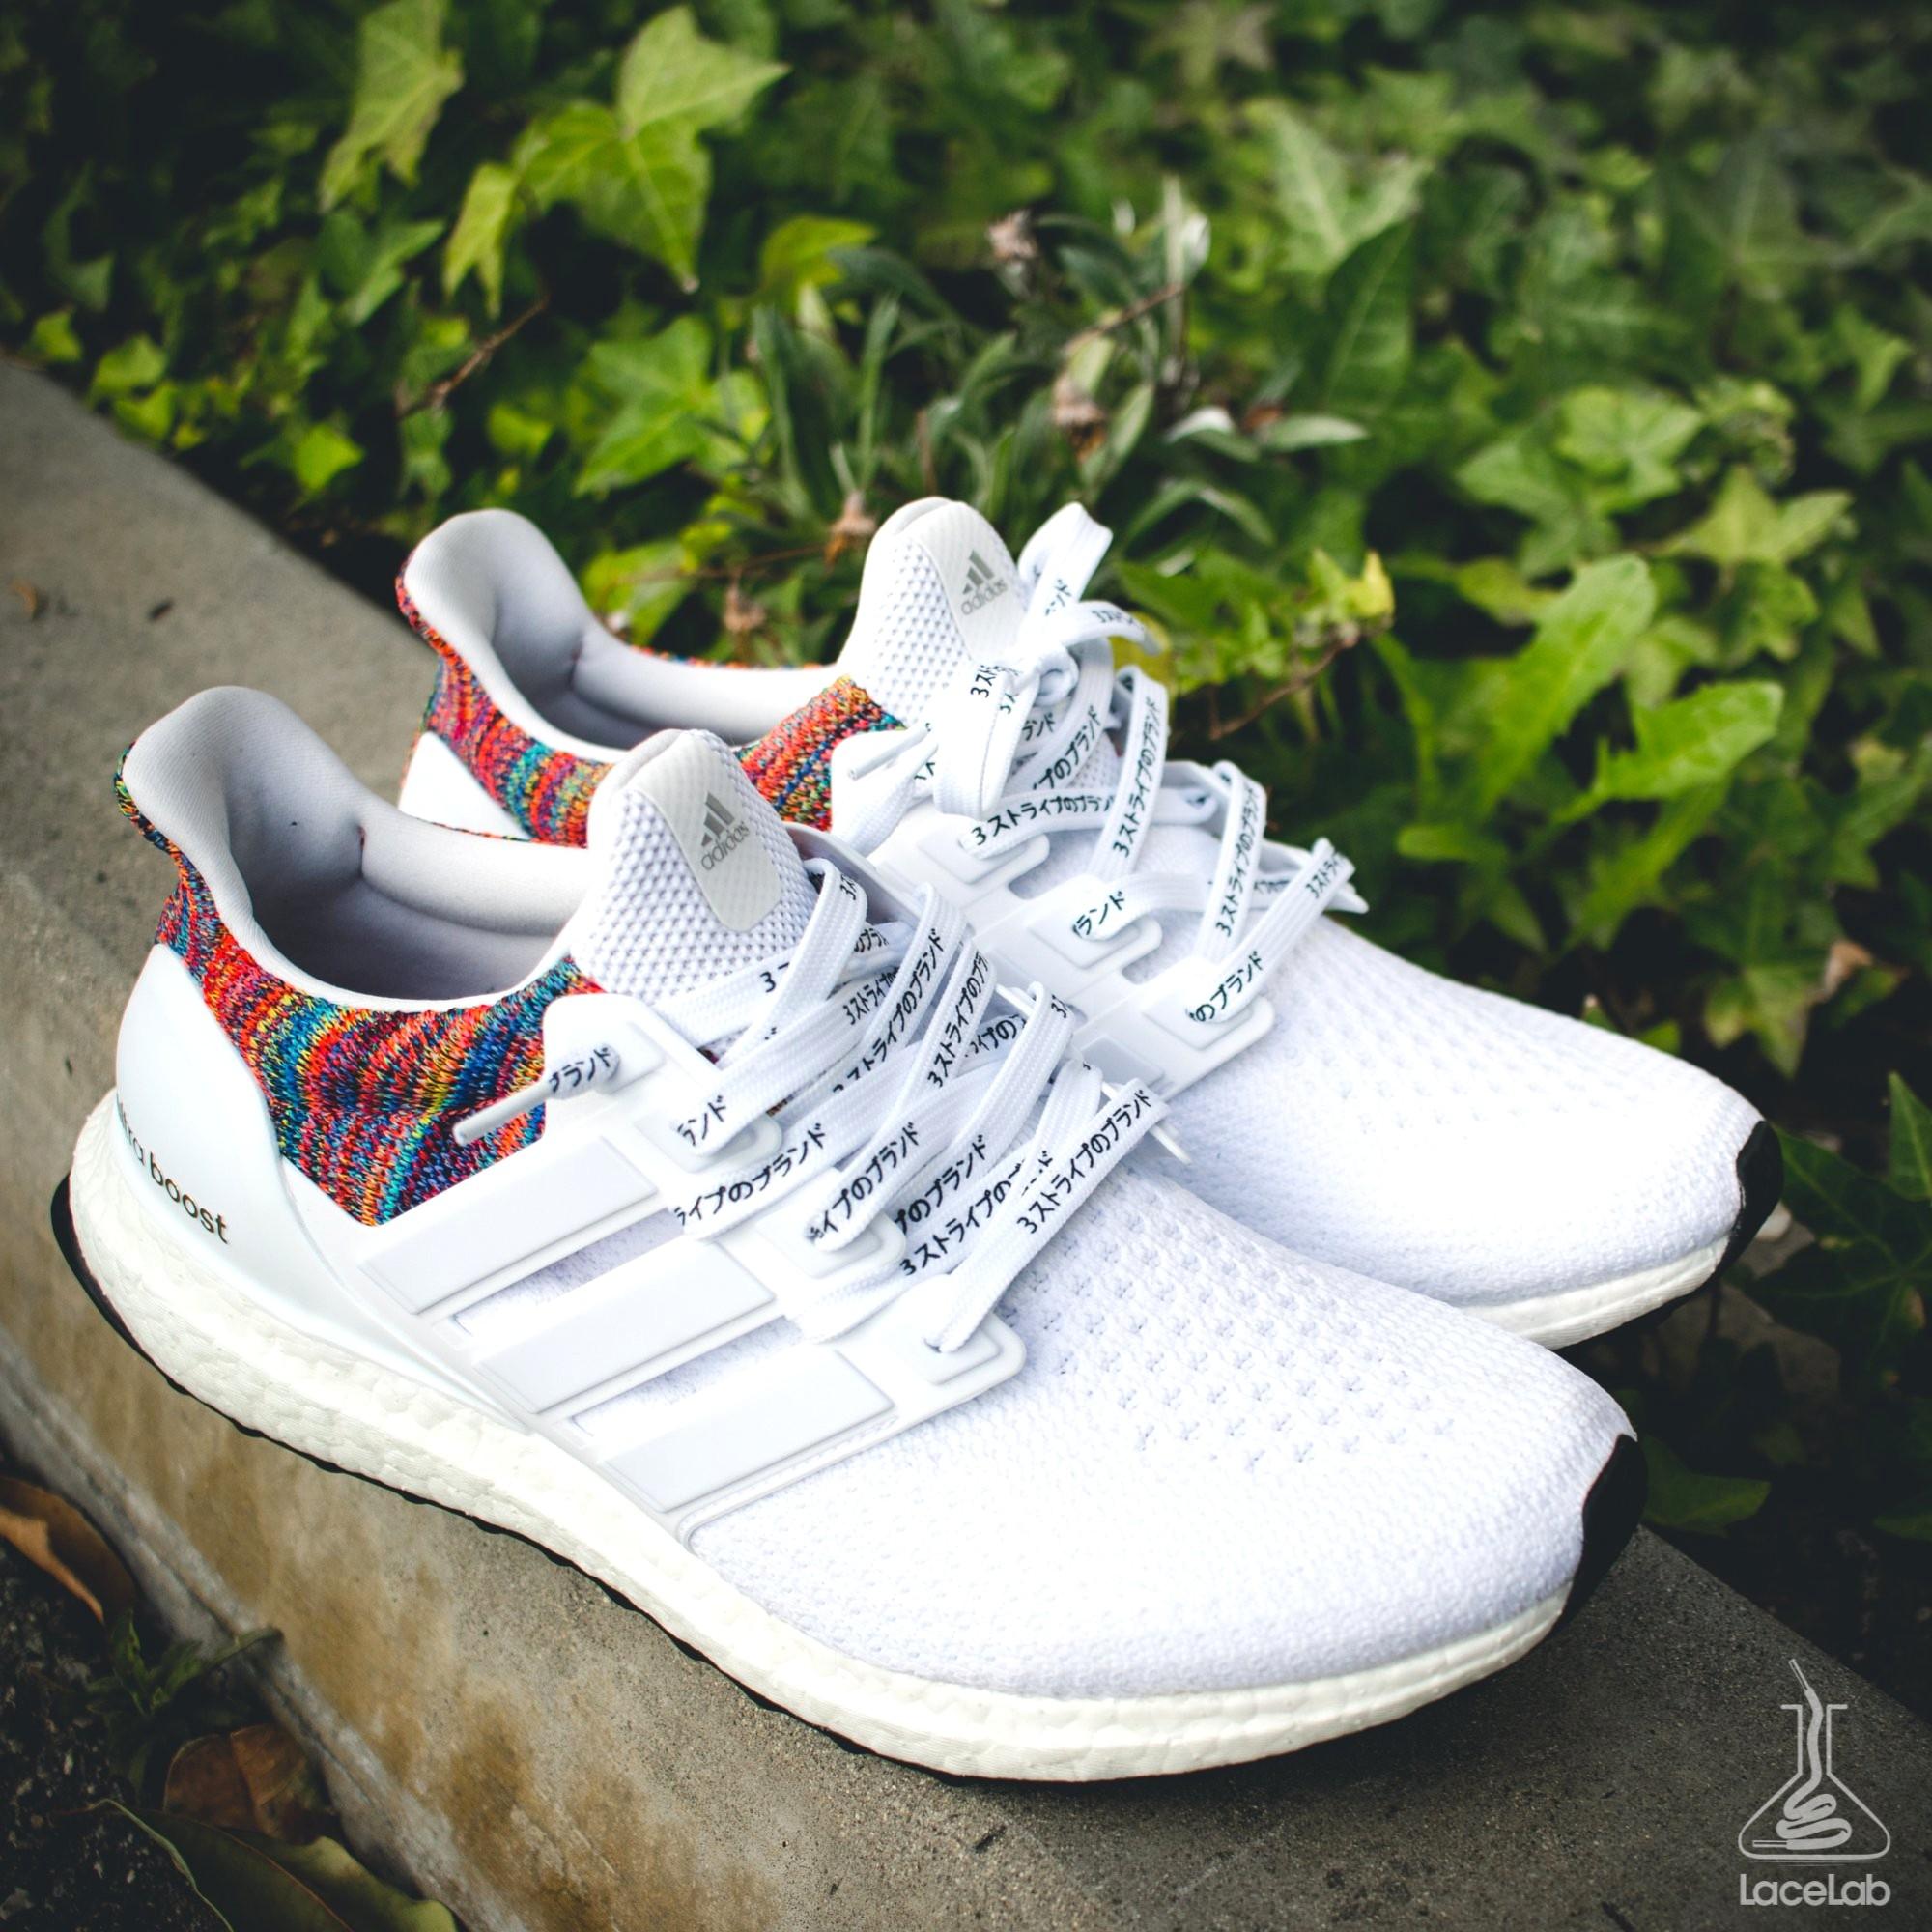 adidas ultra boost shoe laces replacement, Off 66%, www.iusarecords.com